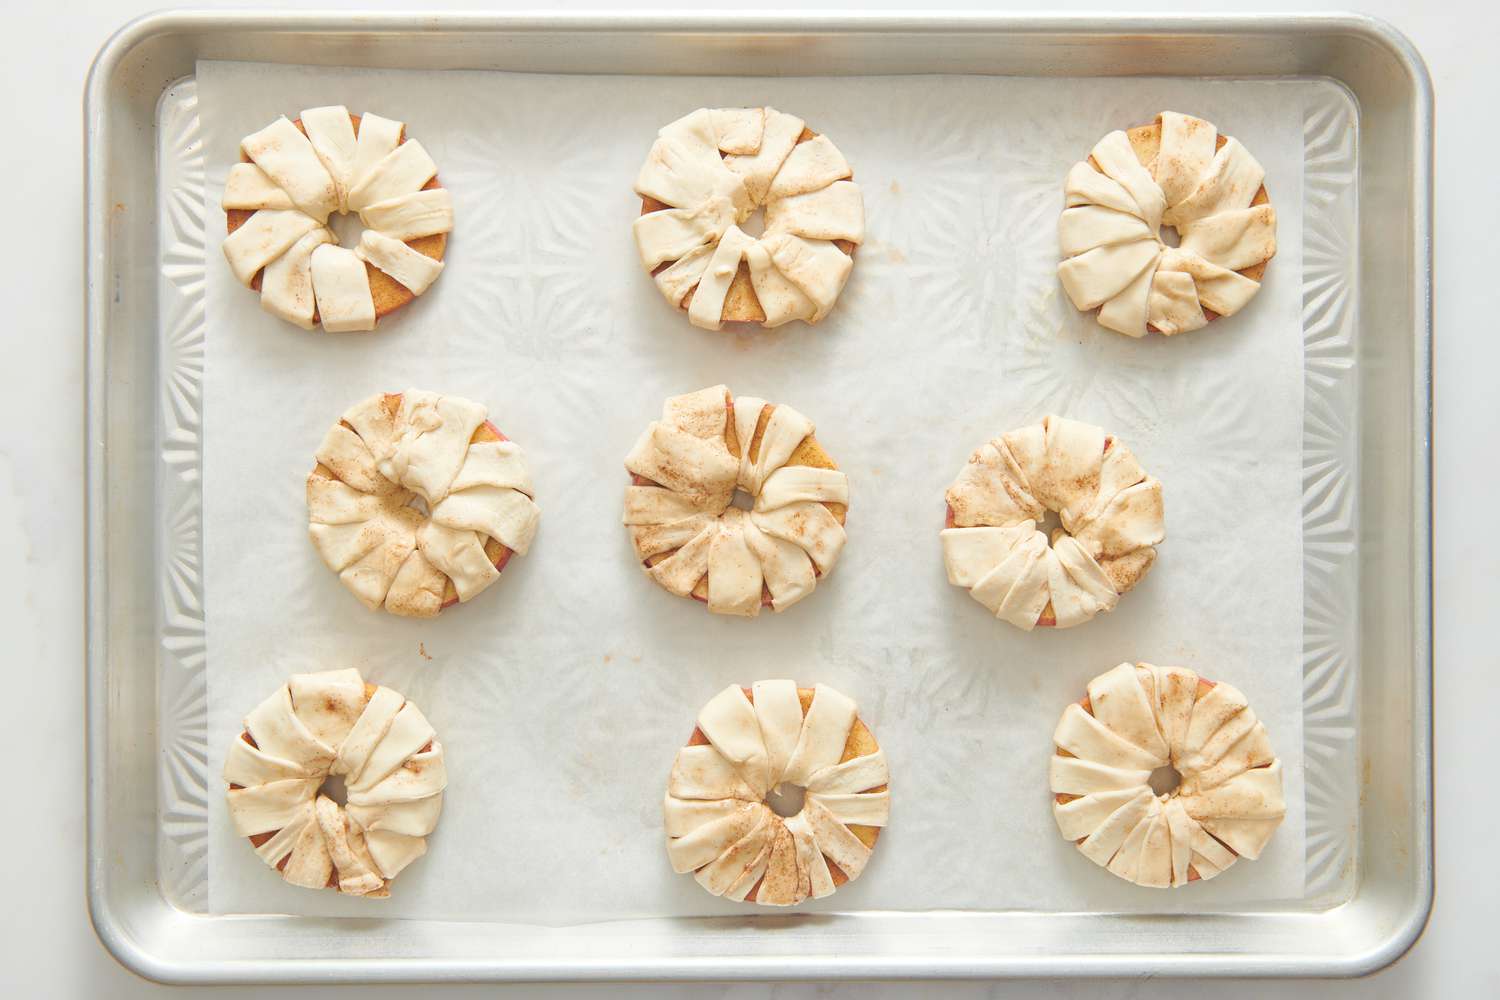 A parchment paper lined baking sheet with apple rings wrapped in strips of puff pastry